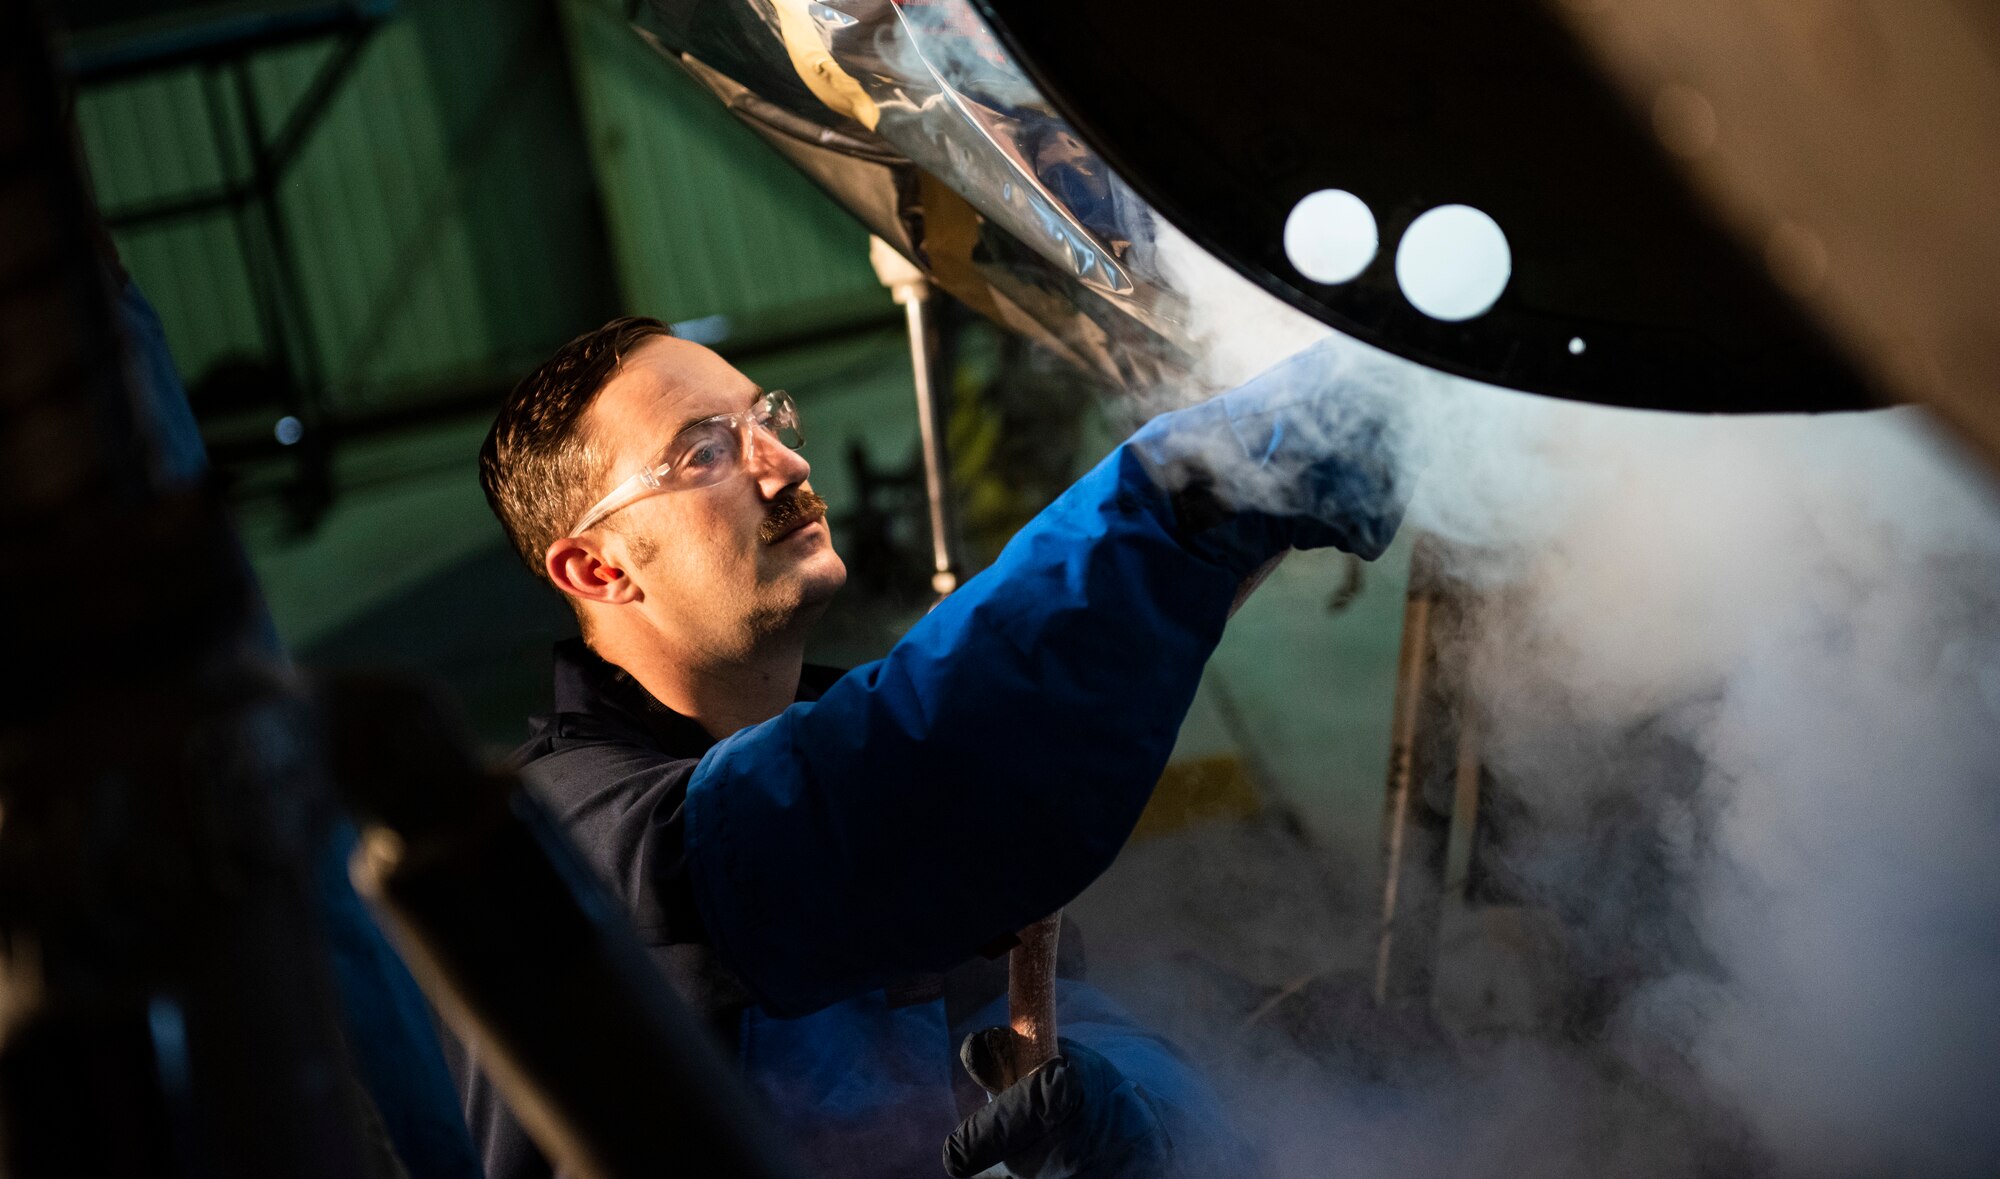 U.S. Air Force Tech. Sgt. Tyler Stratman, 309th Aircraft Maintenance Group depot structural maintenance specialist from Hill Air Force Base, Utah, sprays the bulkhead of an F-16 Fighting Falcon with liquid nitrogen at Kunsan Air Base, Republic of Korea, Nov. 8, 2018. Multiple components on aircraft have to be replaced in order to maintain the lifespan, keep them operational, and sharpen the lethality of the Wolf Pack fleet. (U.S. Air Force photo by Senior Airman Stefan Alvarez)